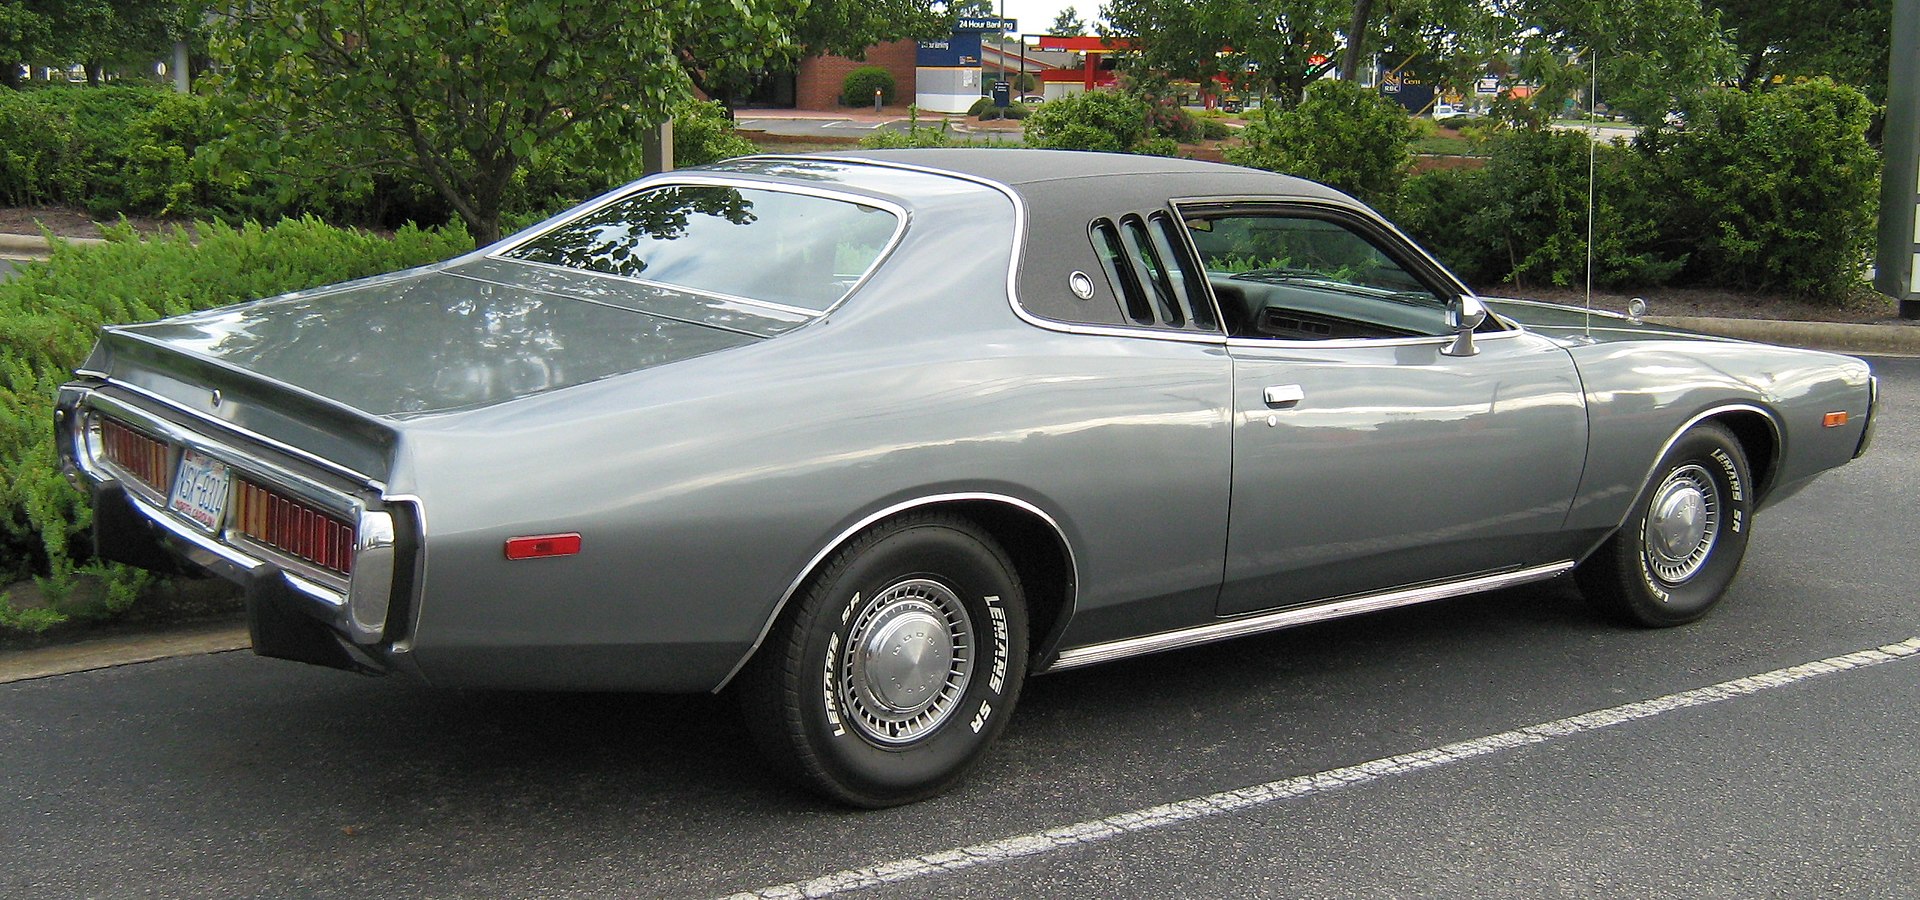 1973_Charger_side